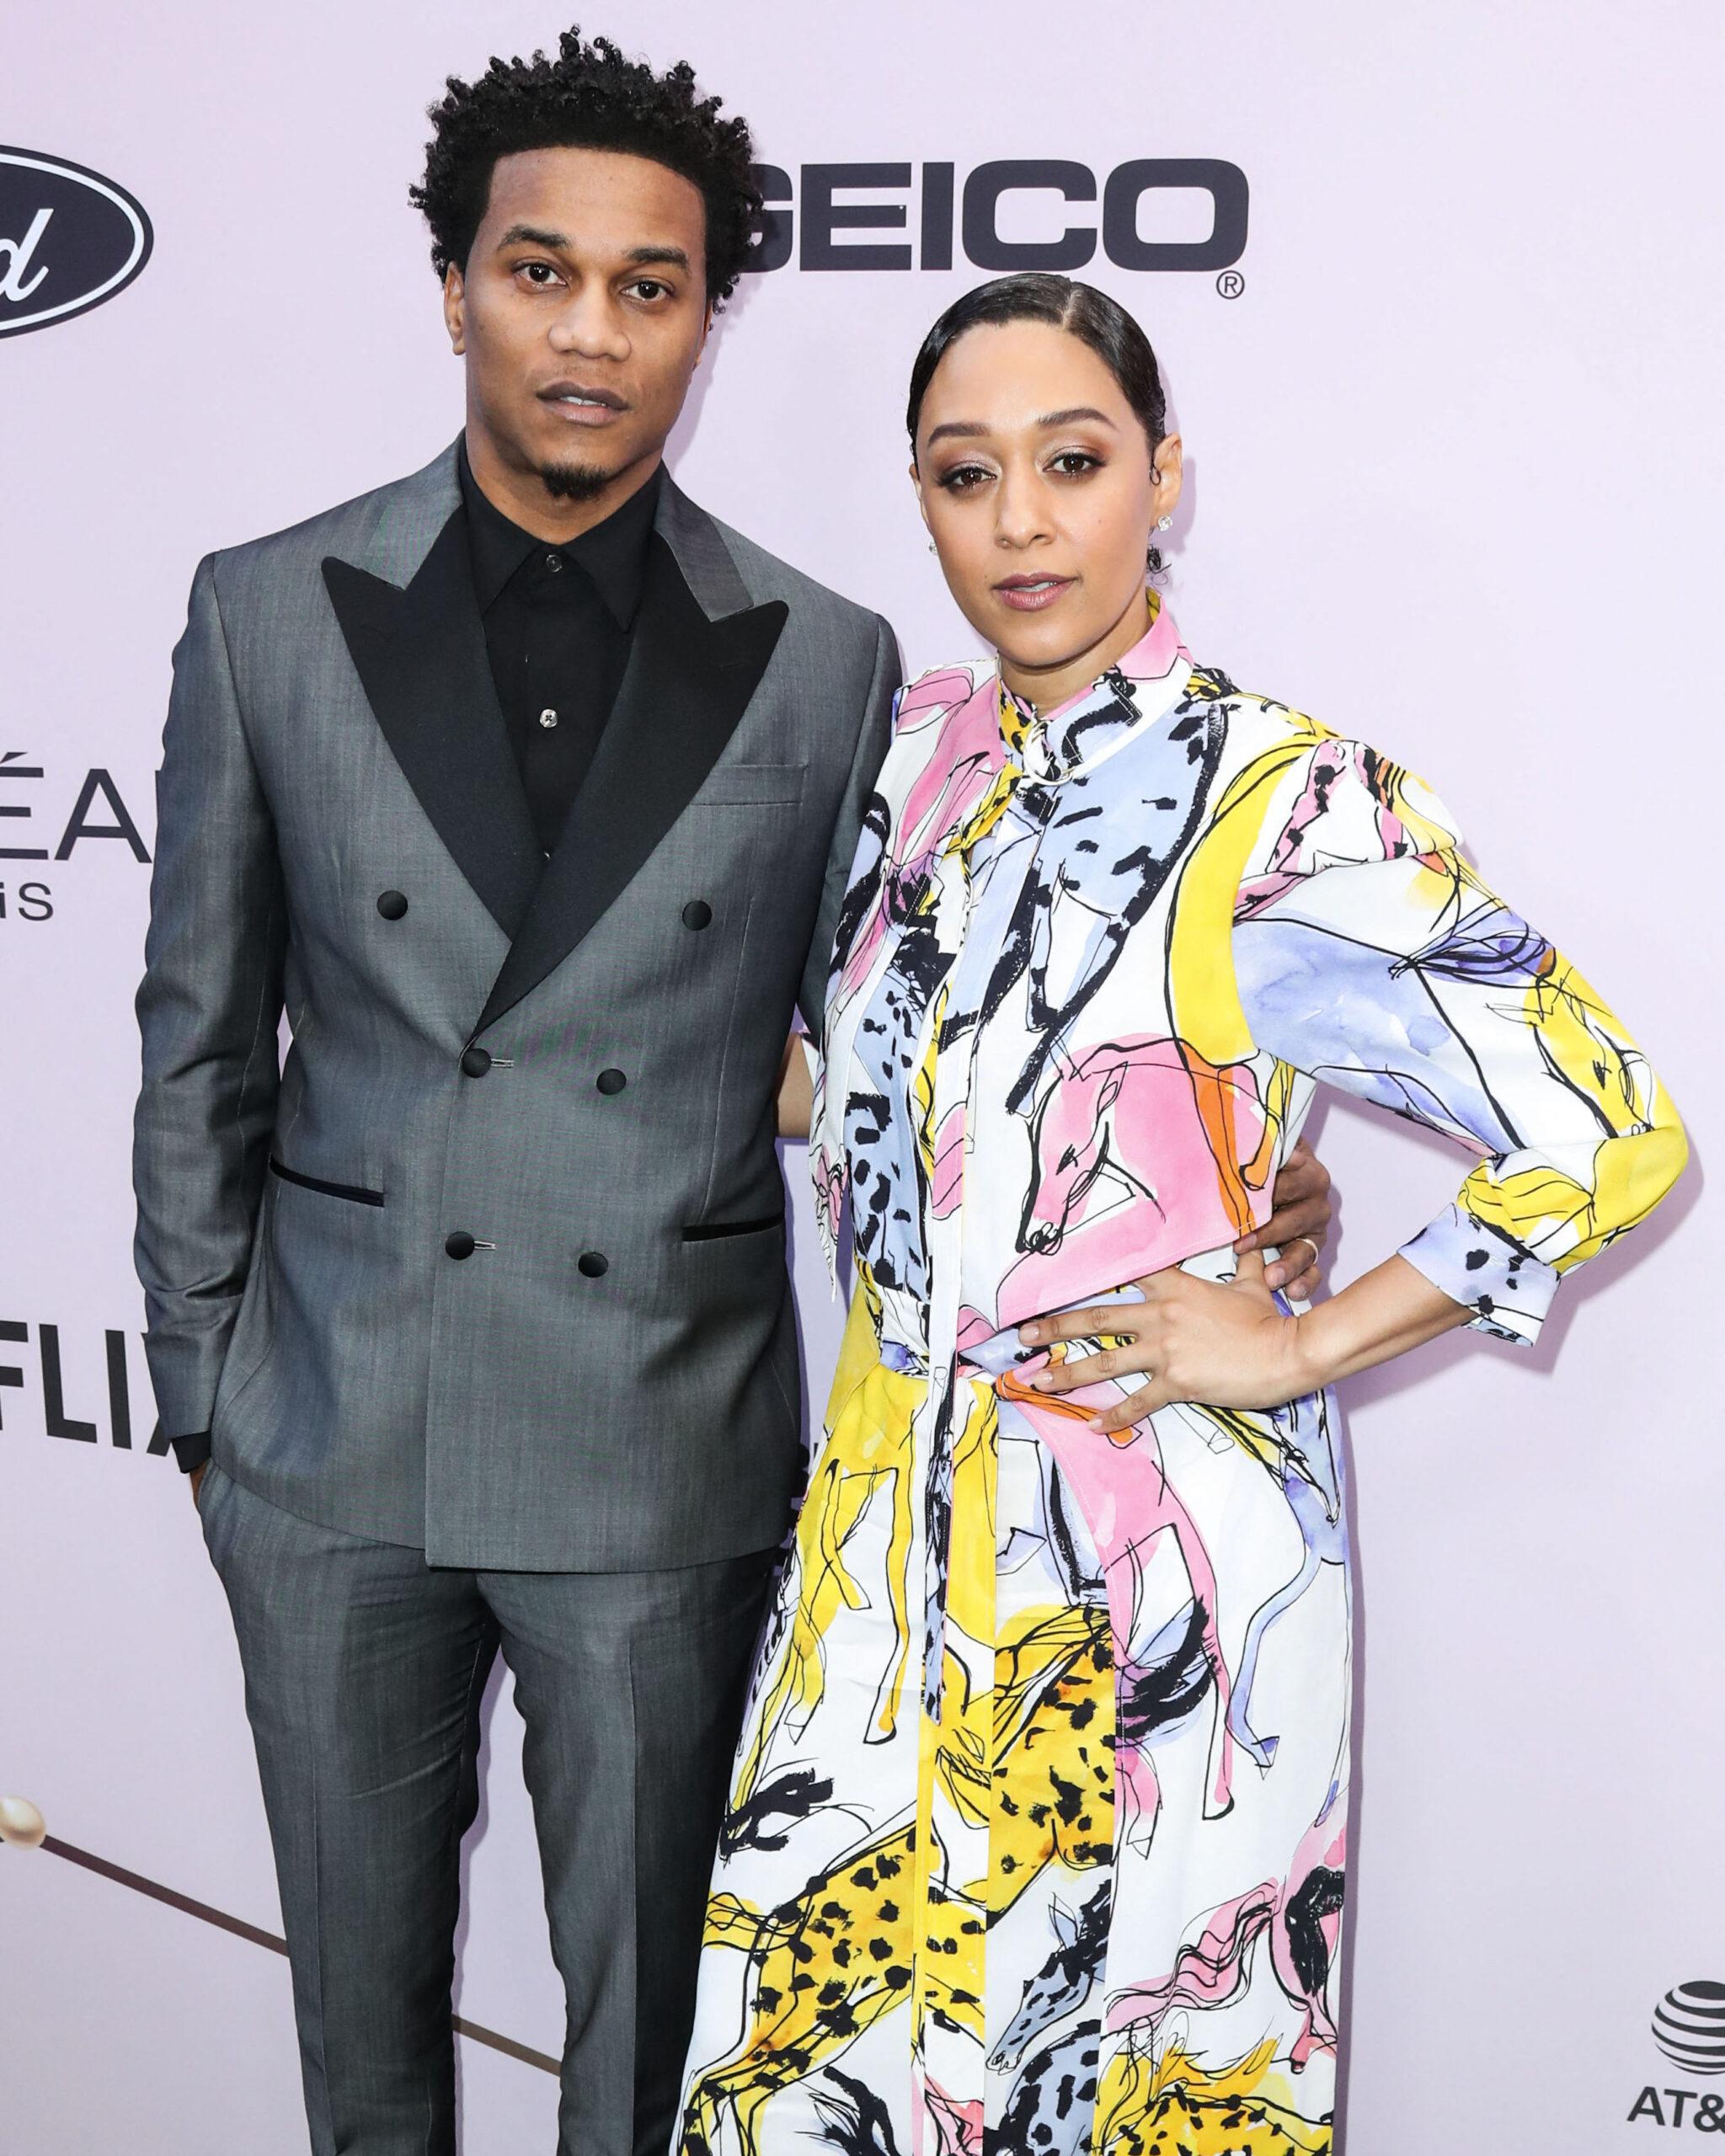 Tia Mowry Files For Divorce From Cory Hardrict After 14 Years Of Marriage